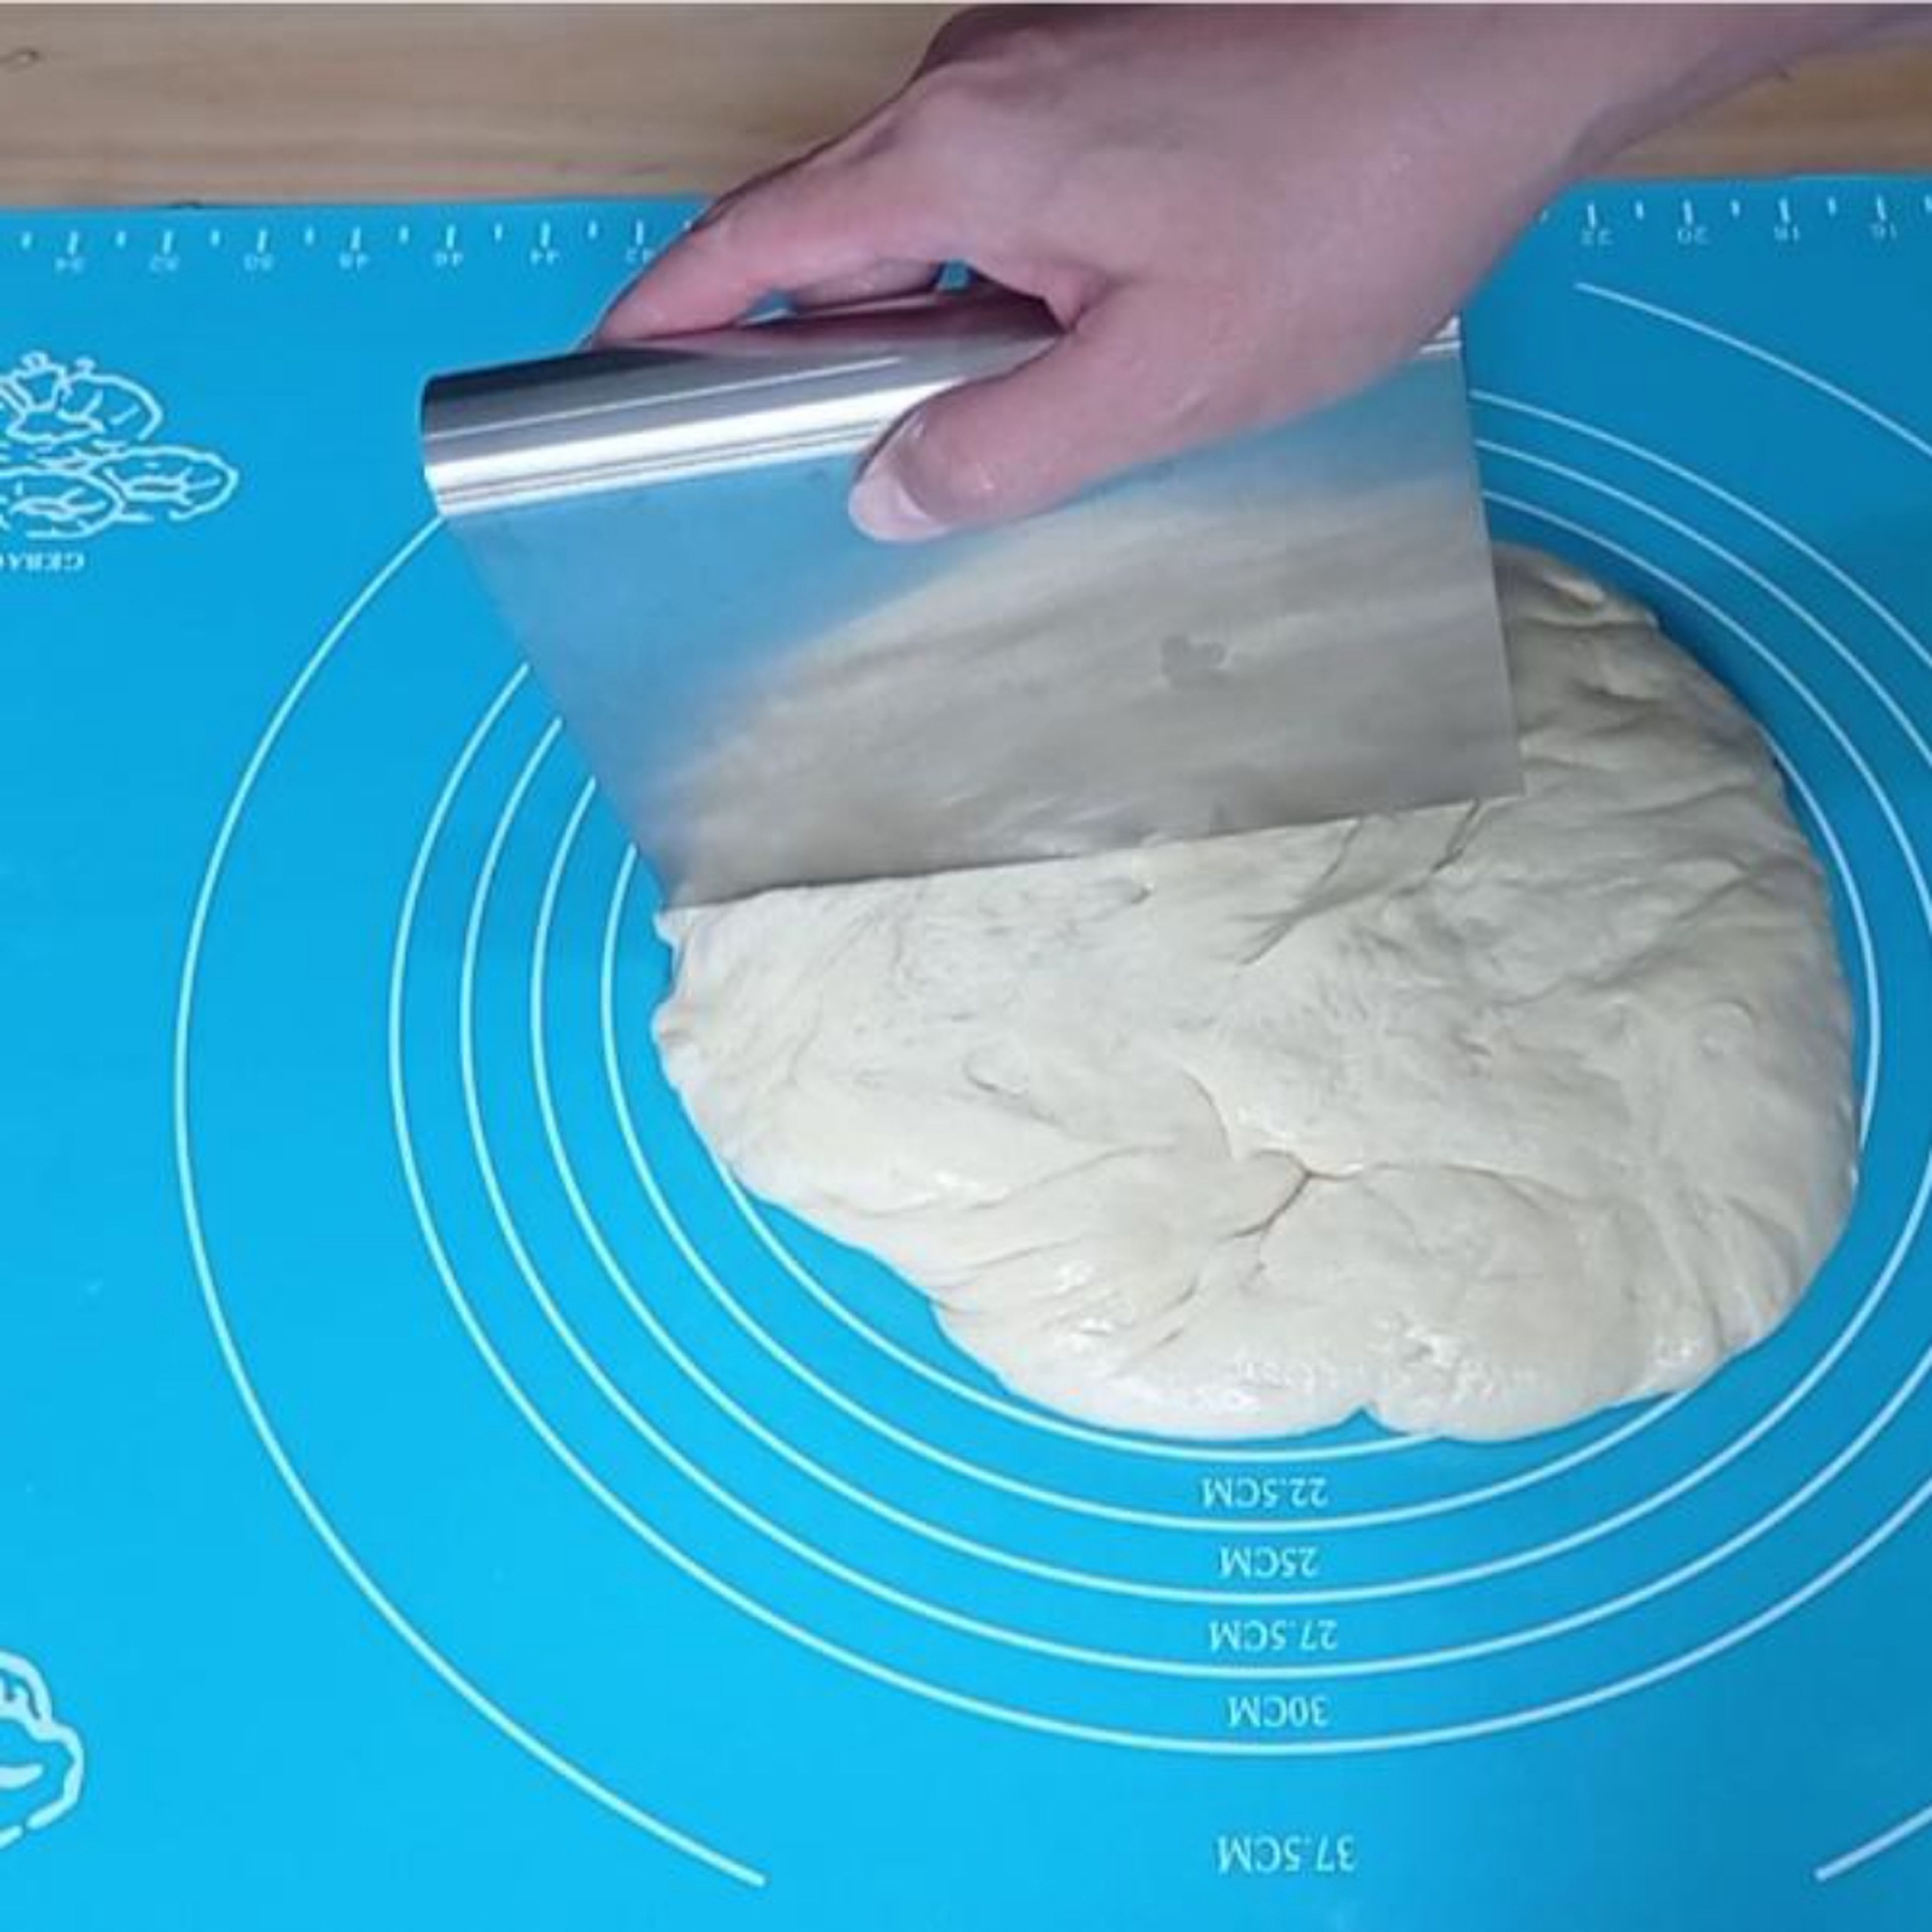 After 1 hour, open the kitchen towel and punch the dough to remove the air bubbles. Make the dough into a ball and divide the dough into 9 pieces. Form every dough into a ball and cover with kitchen towel. Let it rest for 10 minutes.